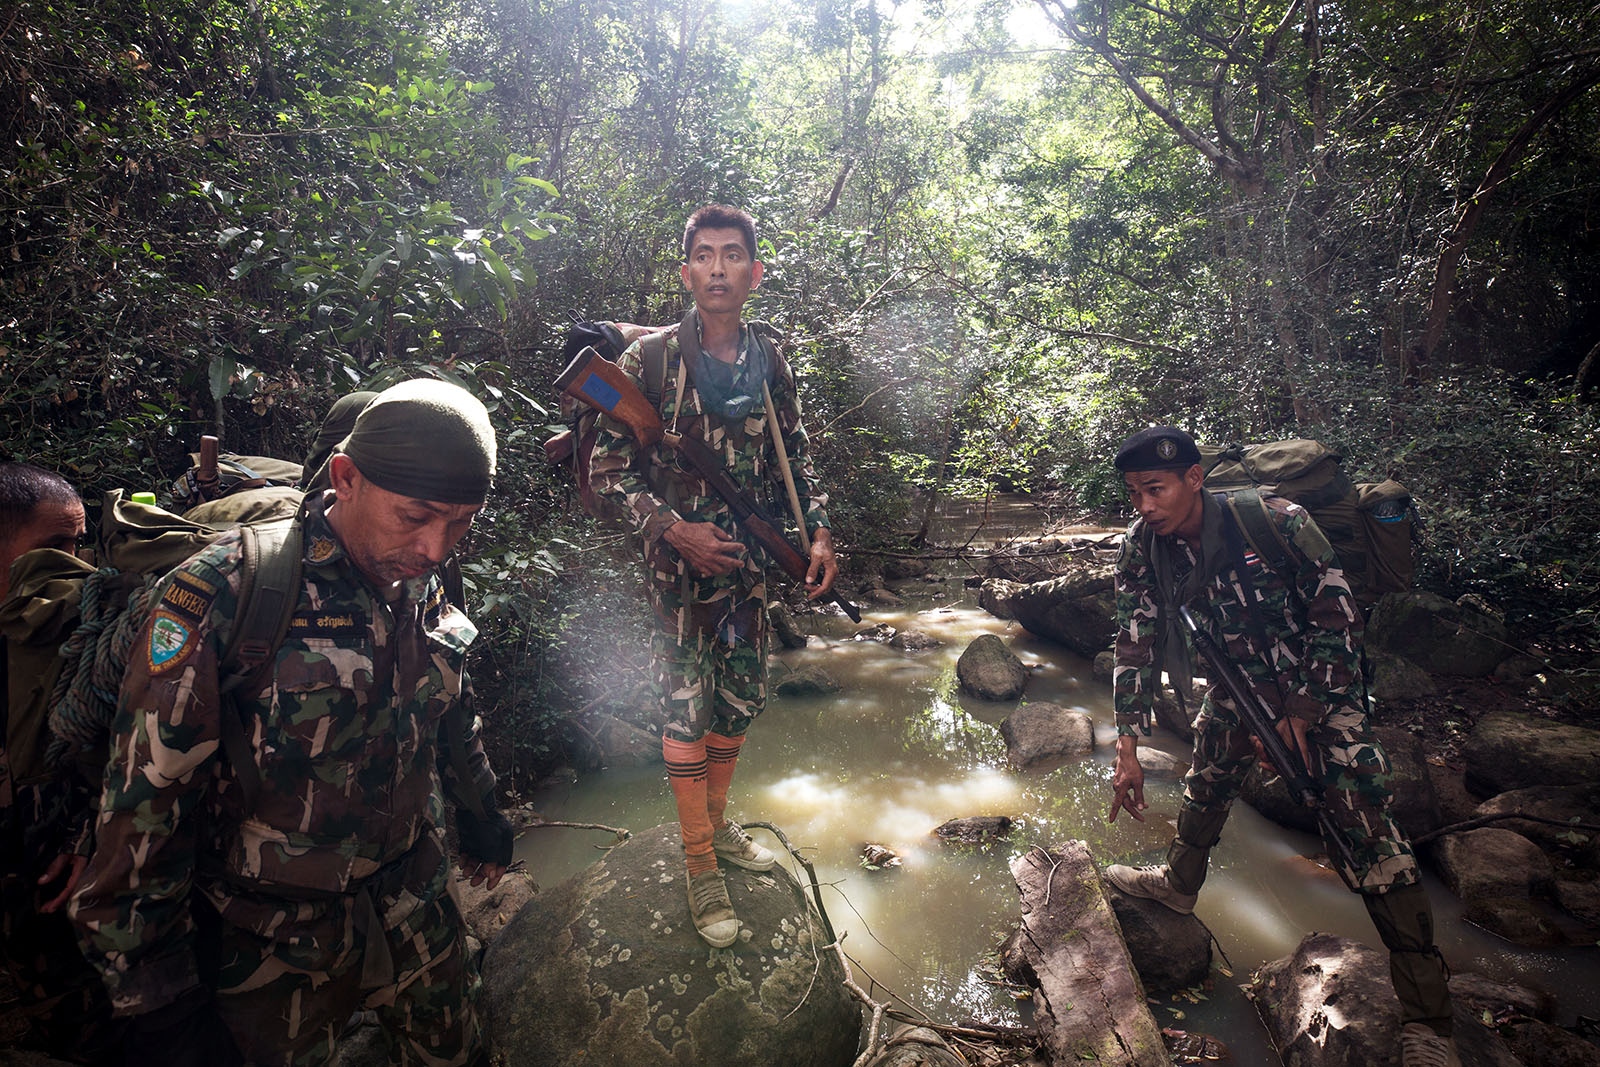 PROTECTING THAILANDS ROSEWOOD - Thai forest rangers inspect a well known loggers path and...